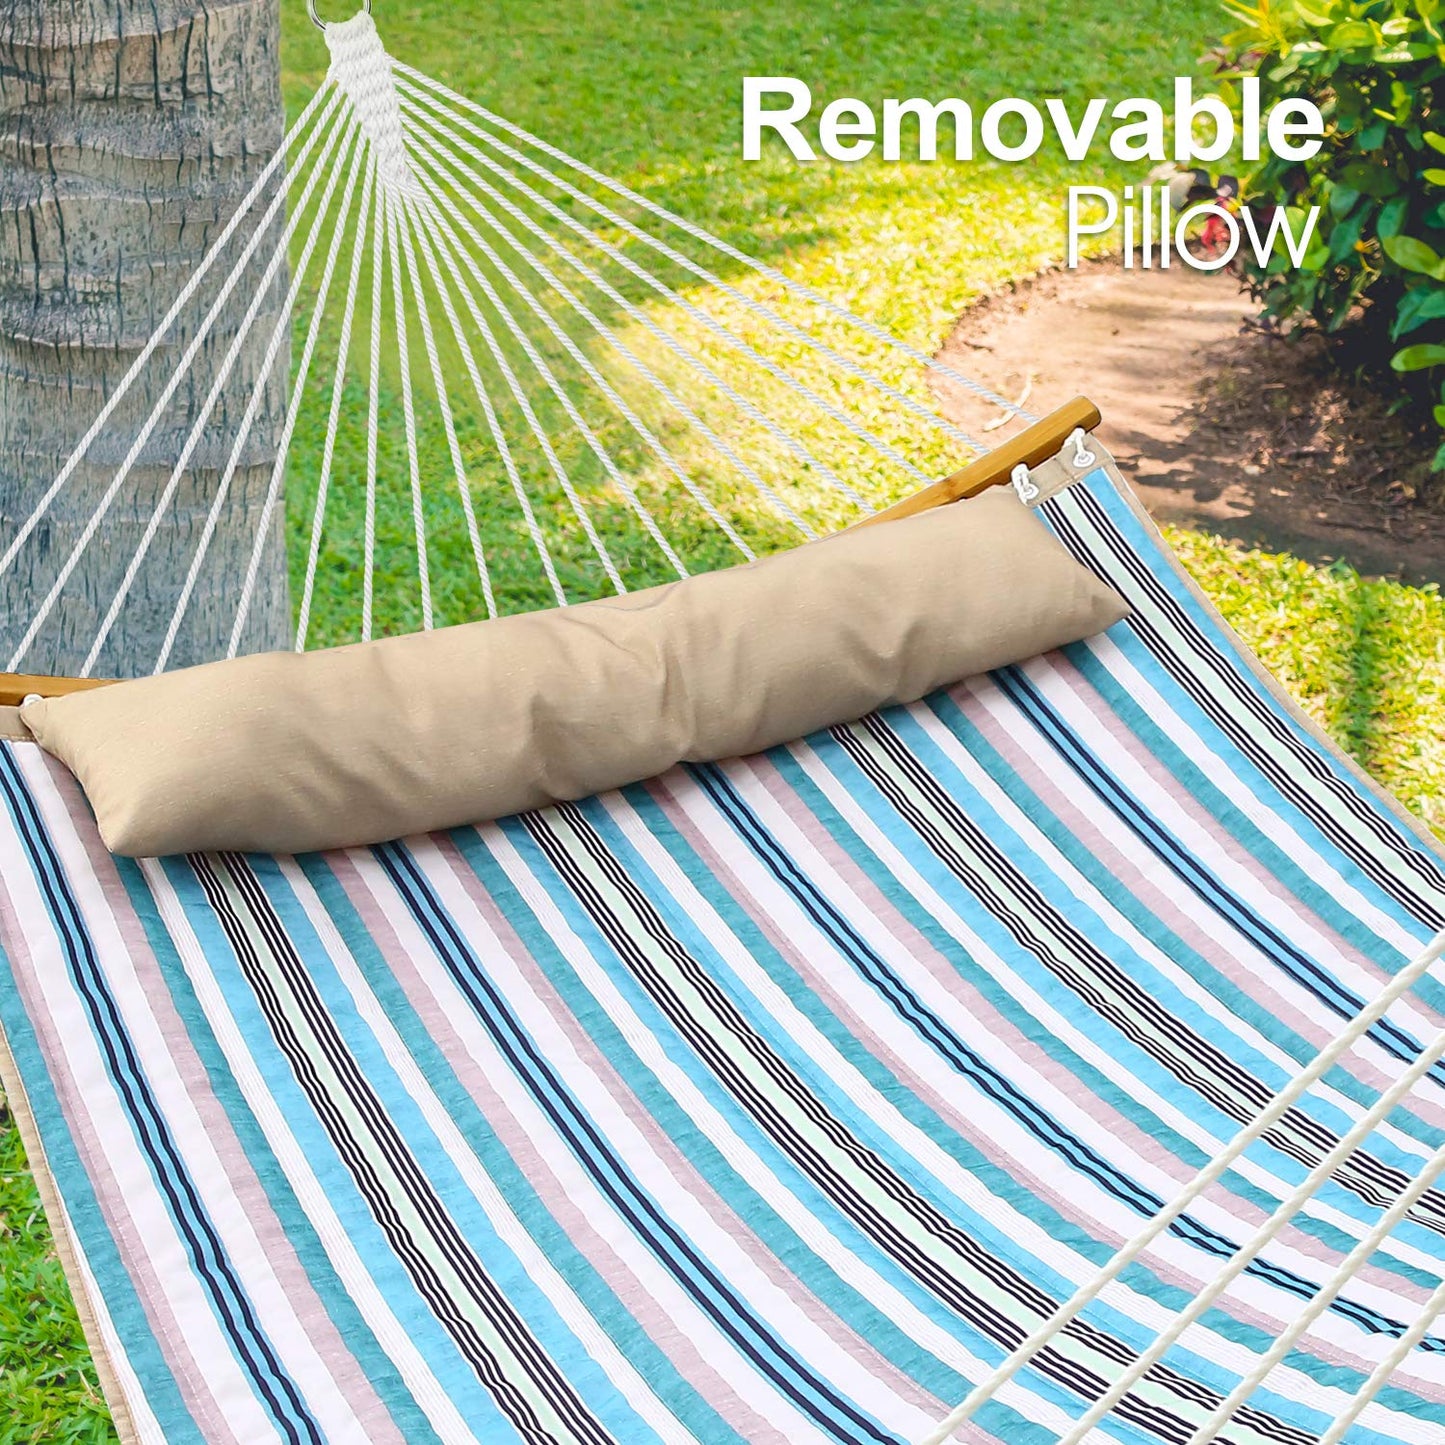 Double Hammock with Detachable Pillow Indoor & Outdoor Use - Ohuhu